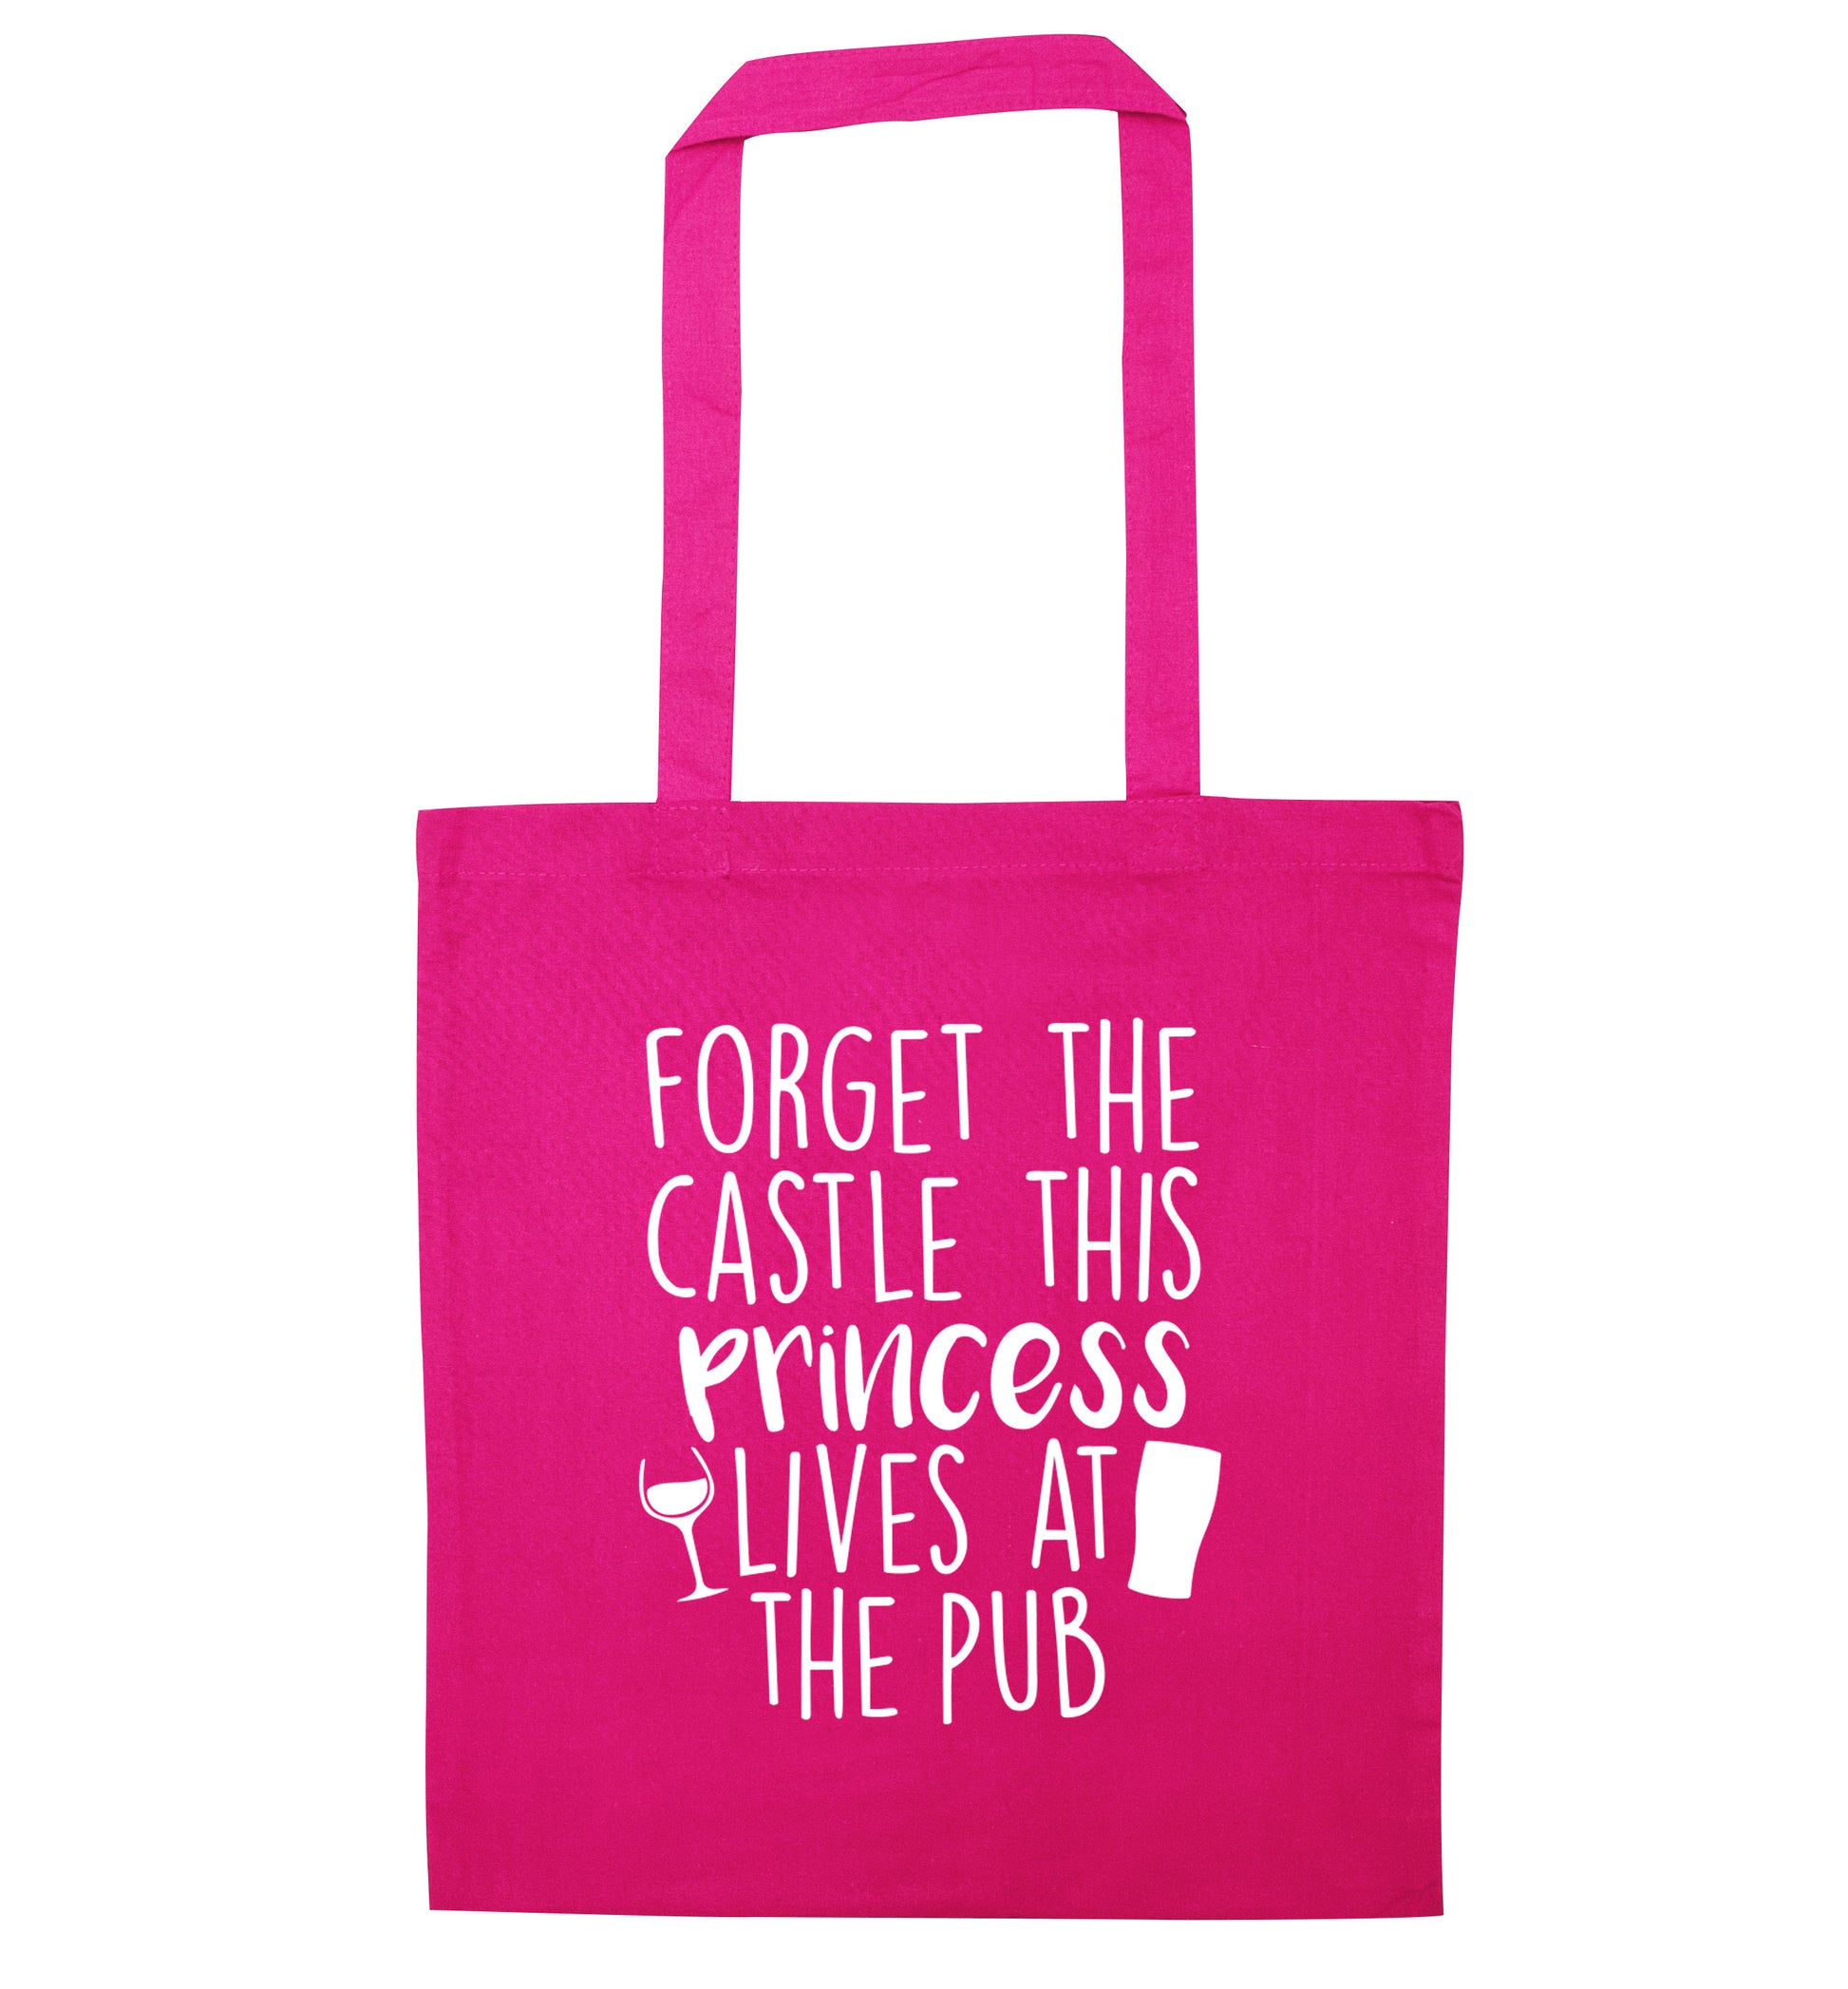 Forget the castle this princess lives at the pub pink tote bag